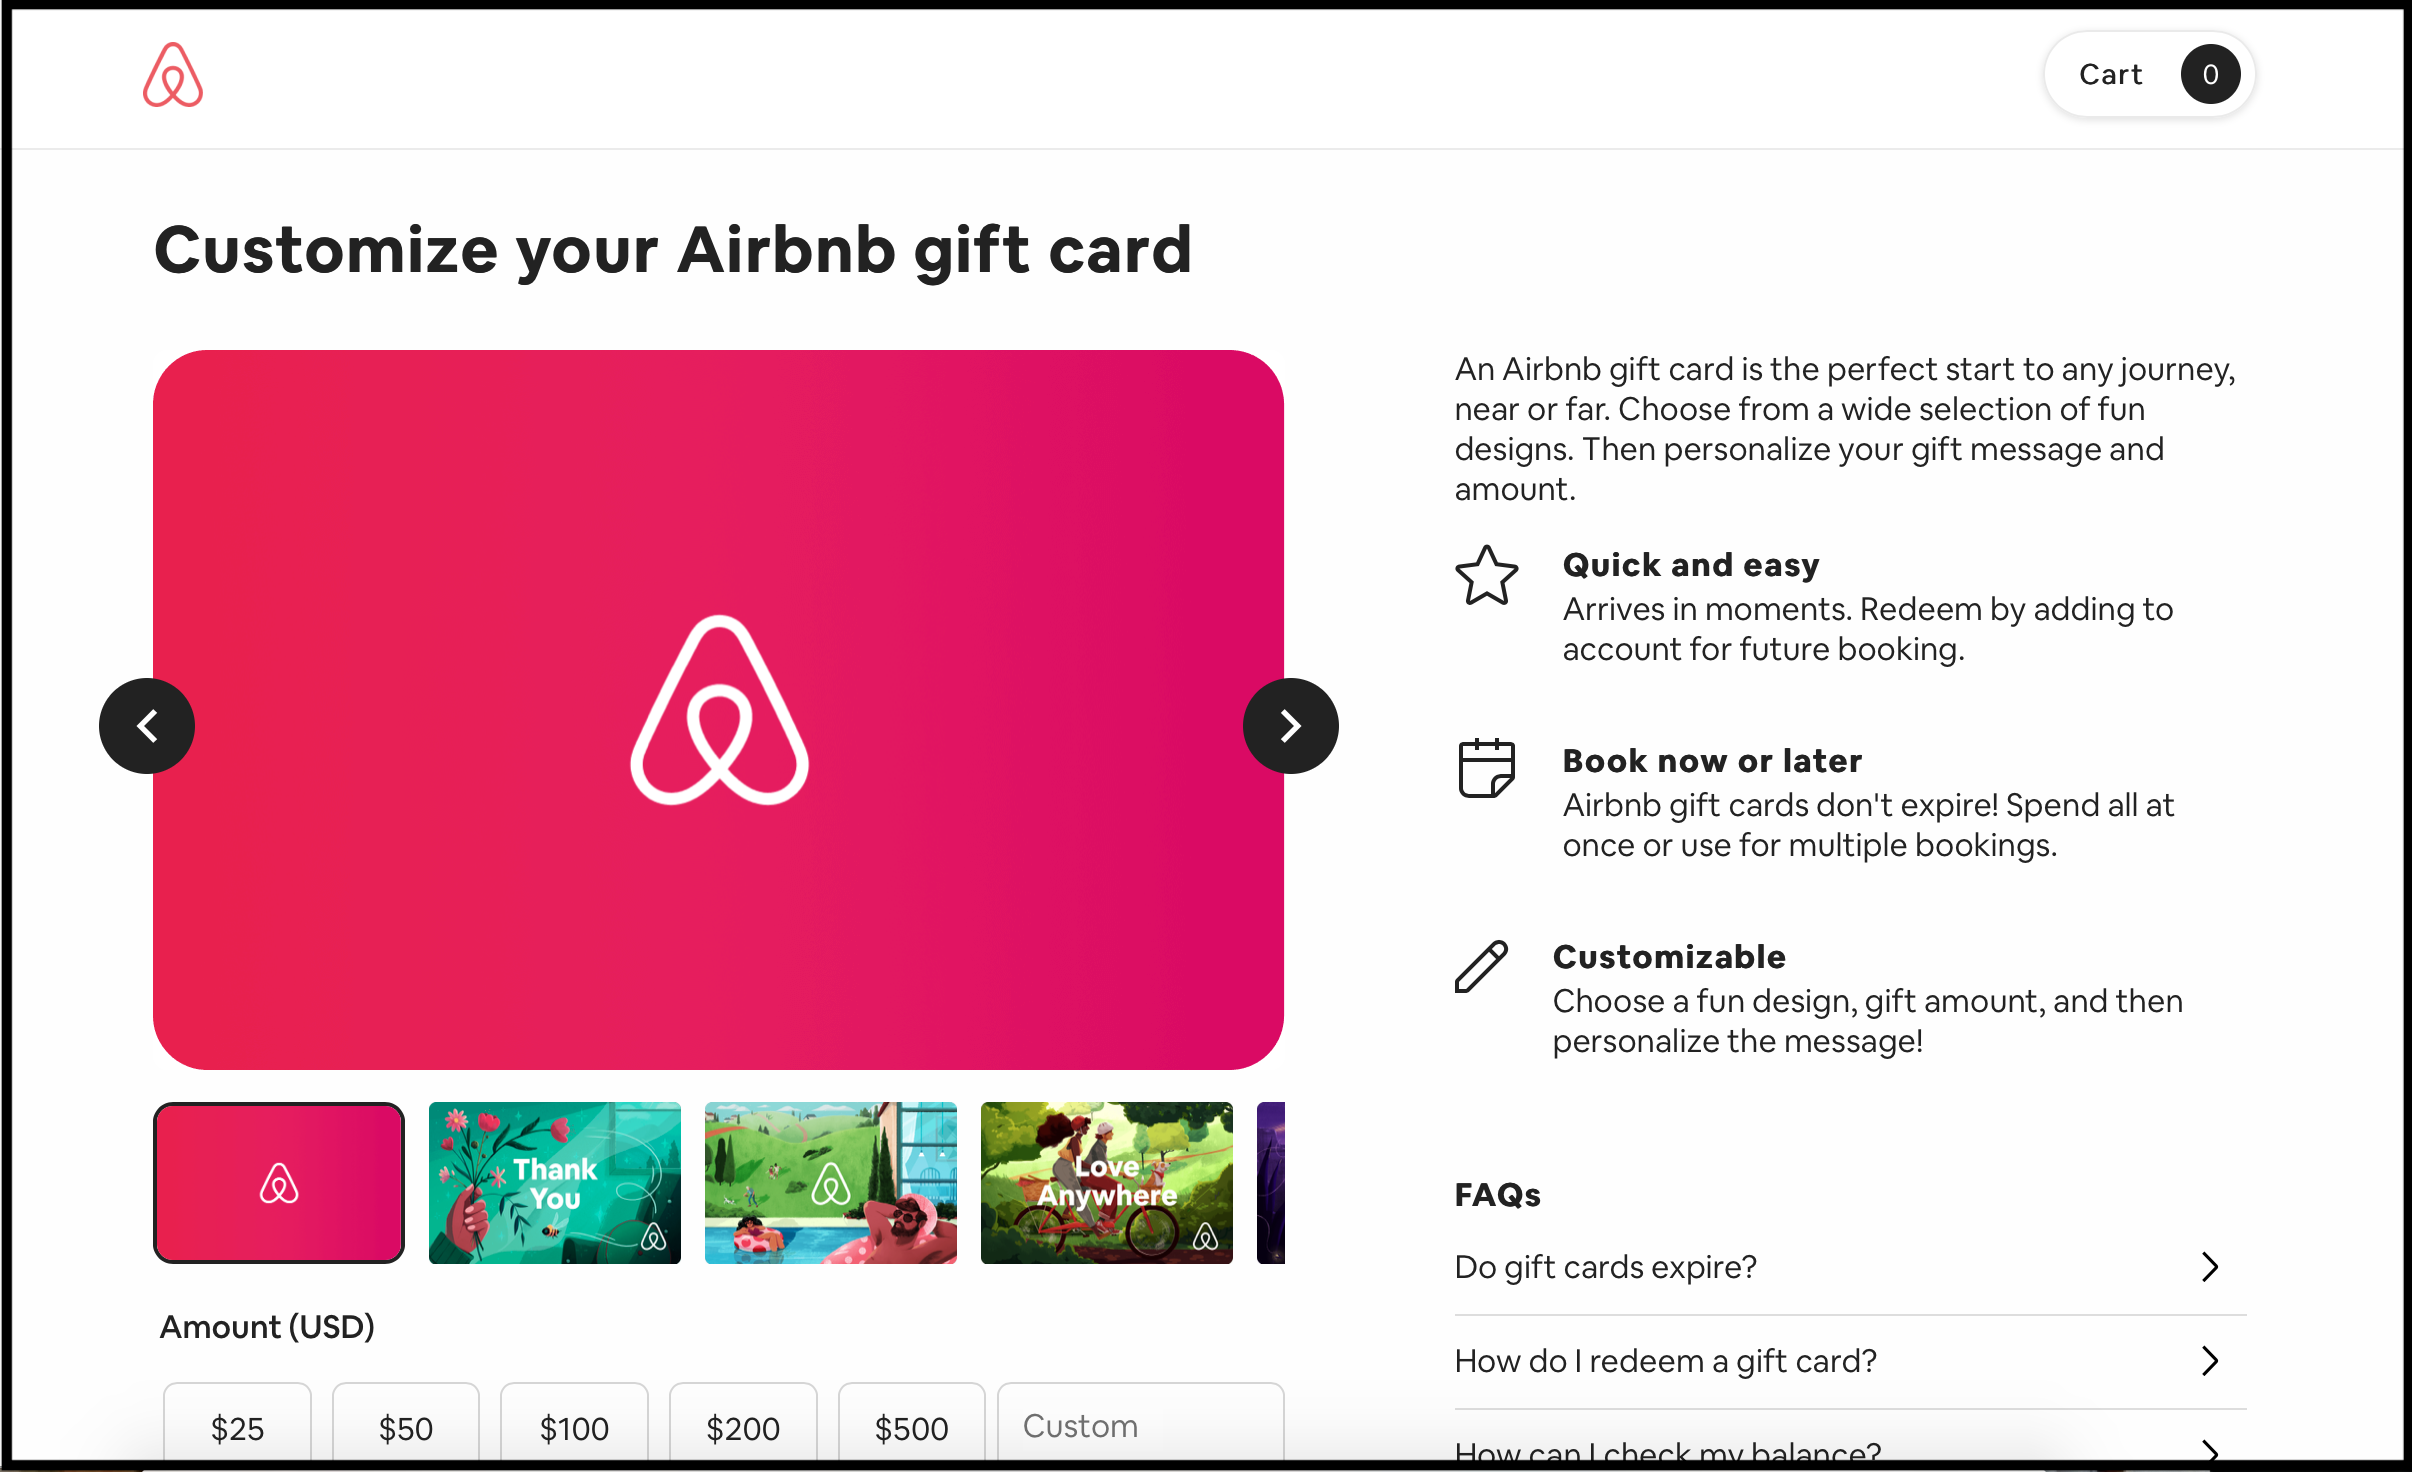 airbnb gift card customize page